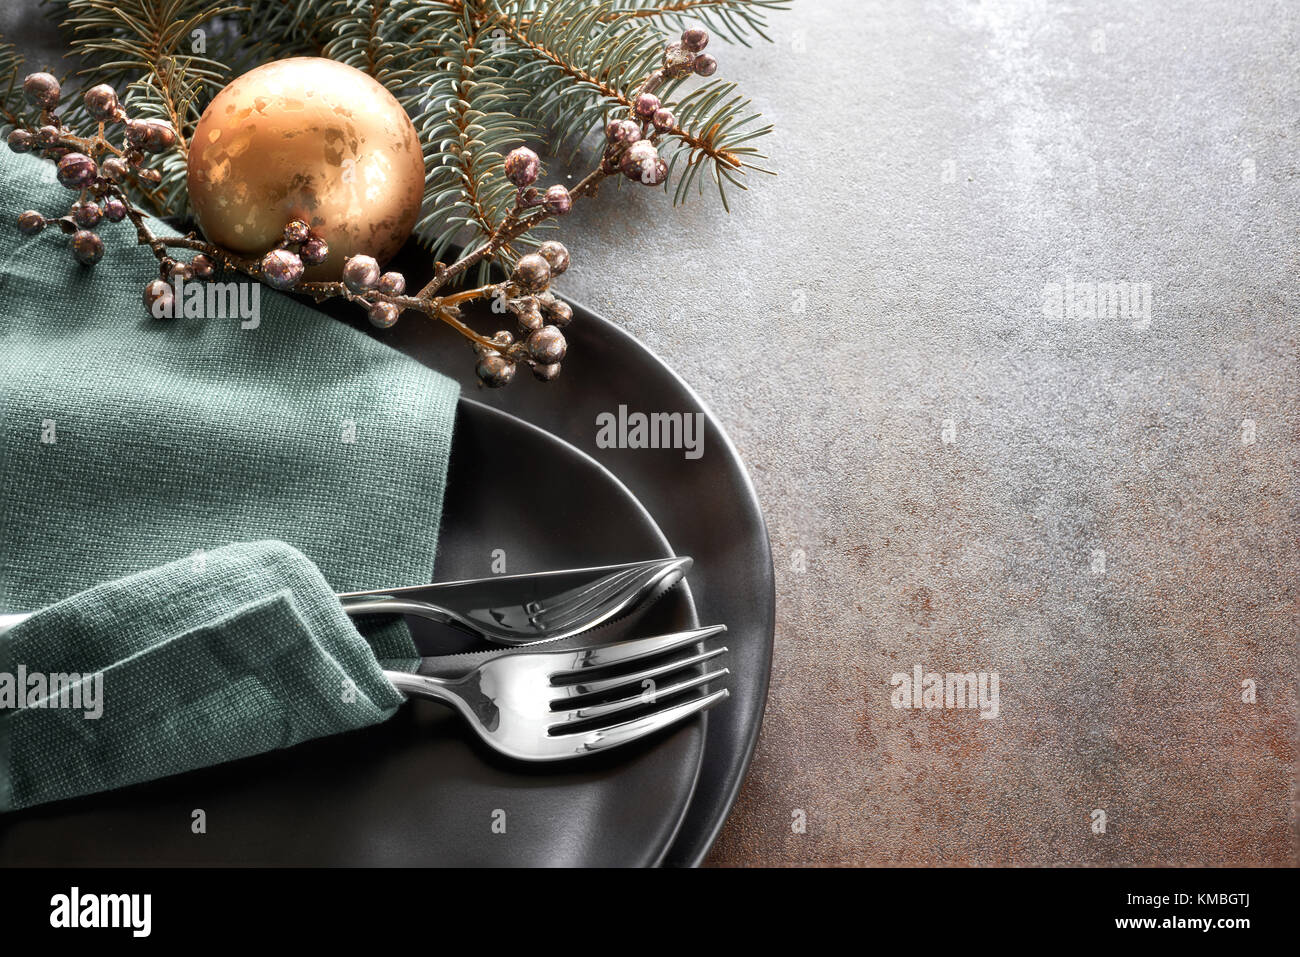 Christmas menu concept with black plates and cutlery decorated with Christmas tree twig and ribbons on rustic background, in turquoise and brown, text Stock Photo